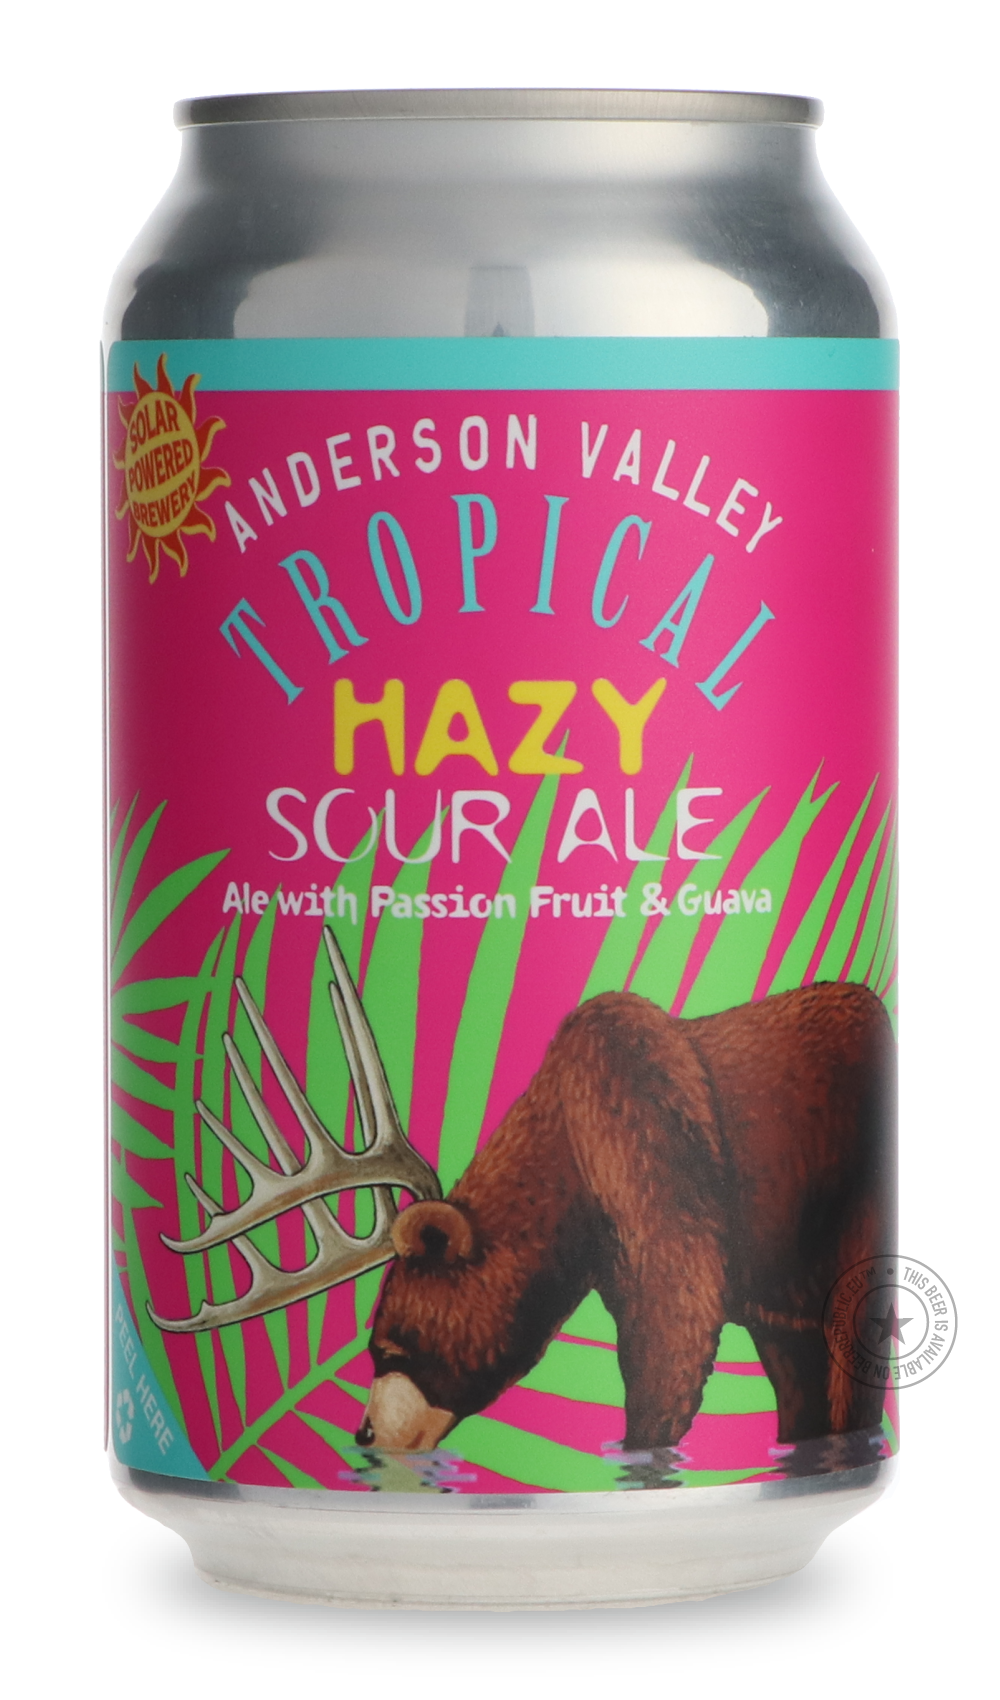 -Anderson Valley- Tropical Hazy Sour-Sour / Wild & Fruity- Only @ Beer Republic - The best online beer store for American & Canadian craft beer - Buy beer online from the USA and Canada - Bier online kopen - Amerikaans bier kopen - Craft beer store - Craft beer kopen - Amerikanisch bier kaufen - Bier online kaufen - Acheter biere online - IPA - Stout - Porter - New England IPA - Hazy IPA - Imperial Stout - Barrel Aged - Barrel Aged Imperial Stout - Brown - Dark beer - Blond - Blonde - Pilsner - Lager - Whea